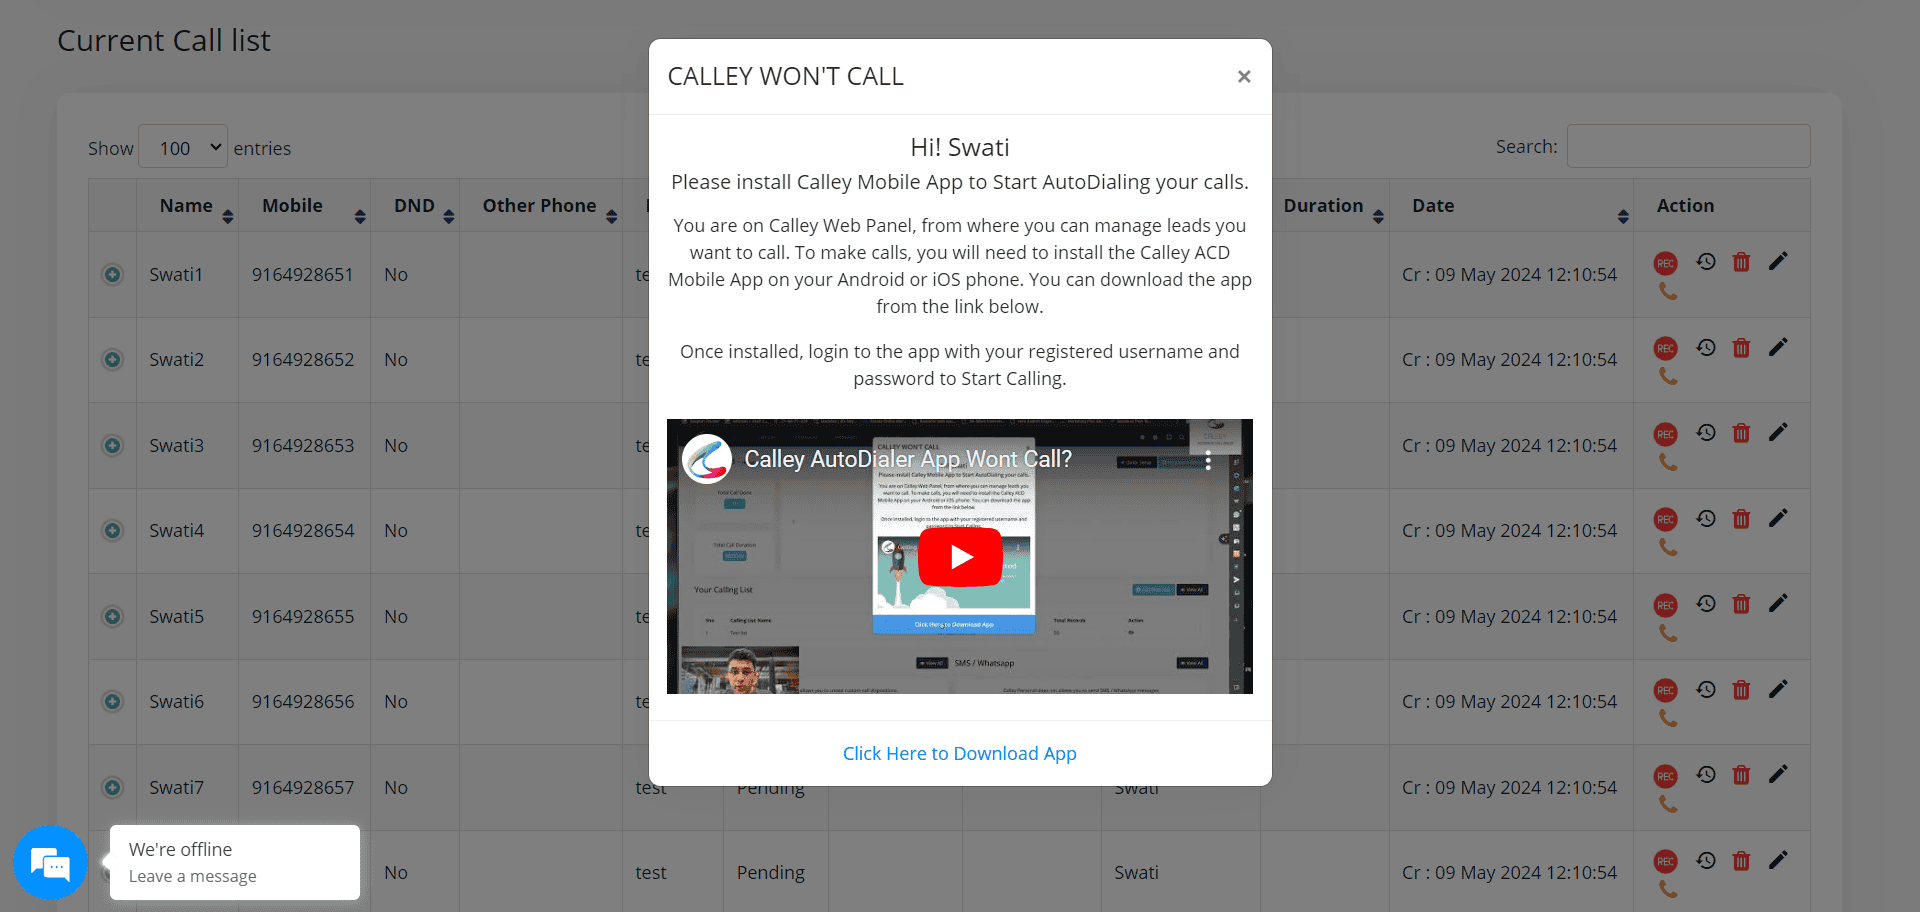 Call won't do PC Dialing in case the app is not connected